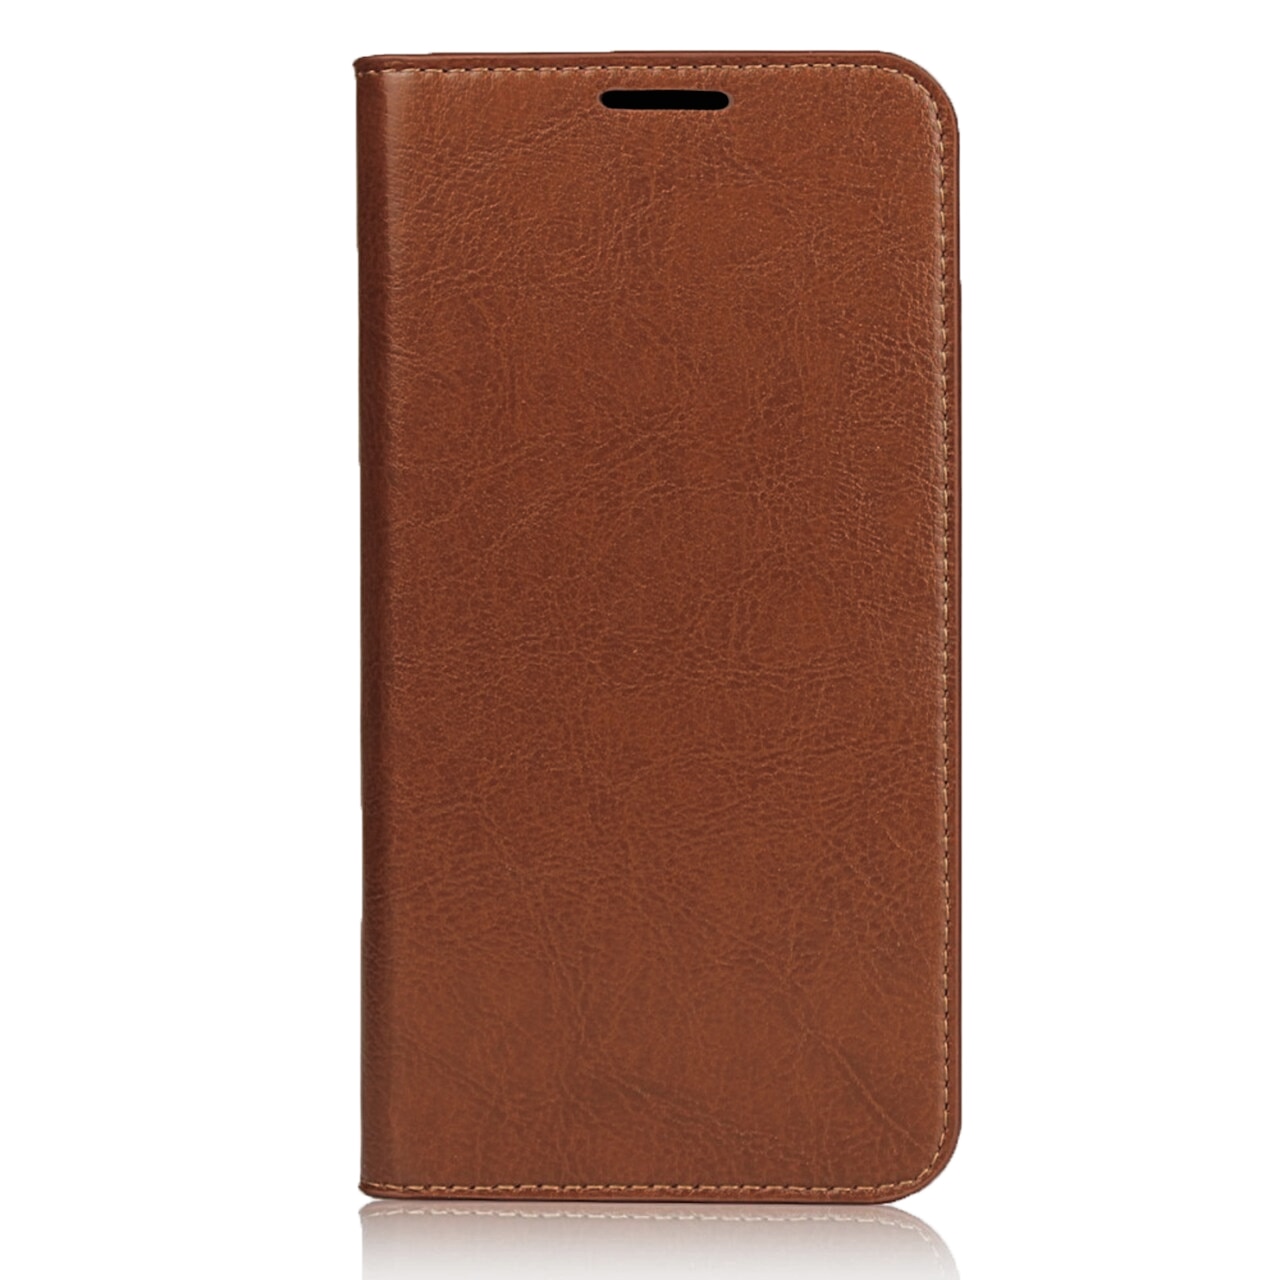 iPhone 11 Pro Genuine Leather Wallet Case Brown